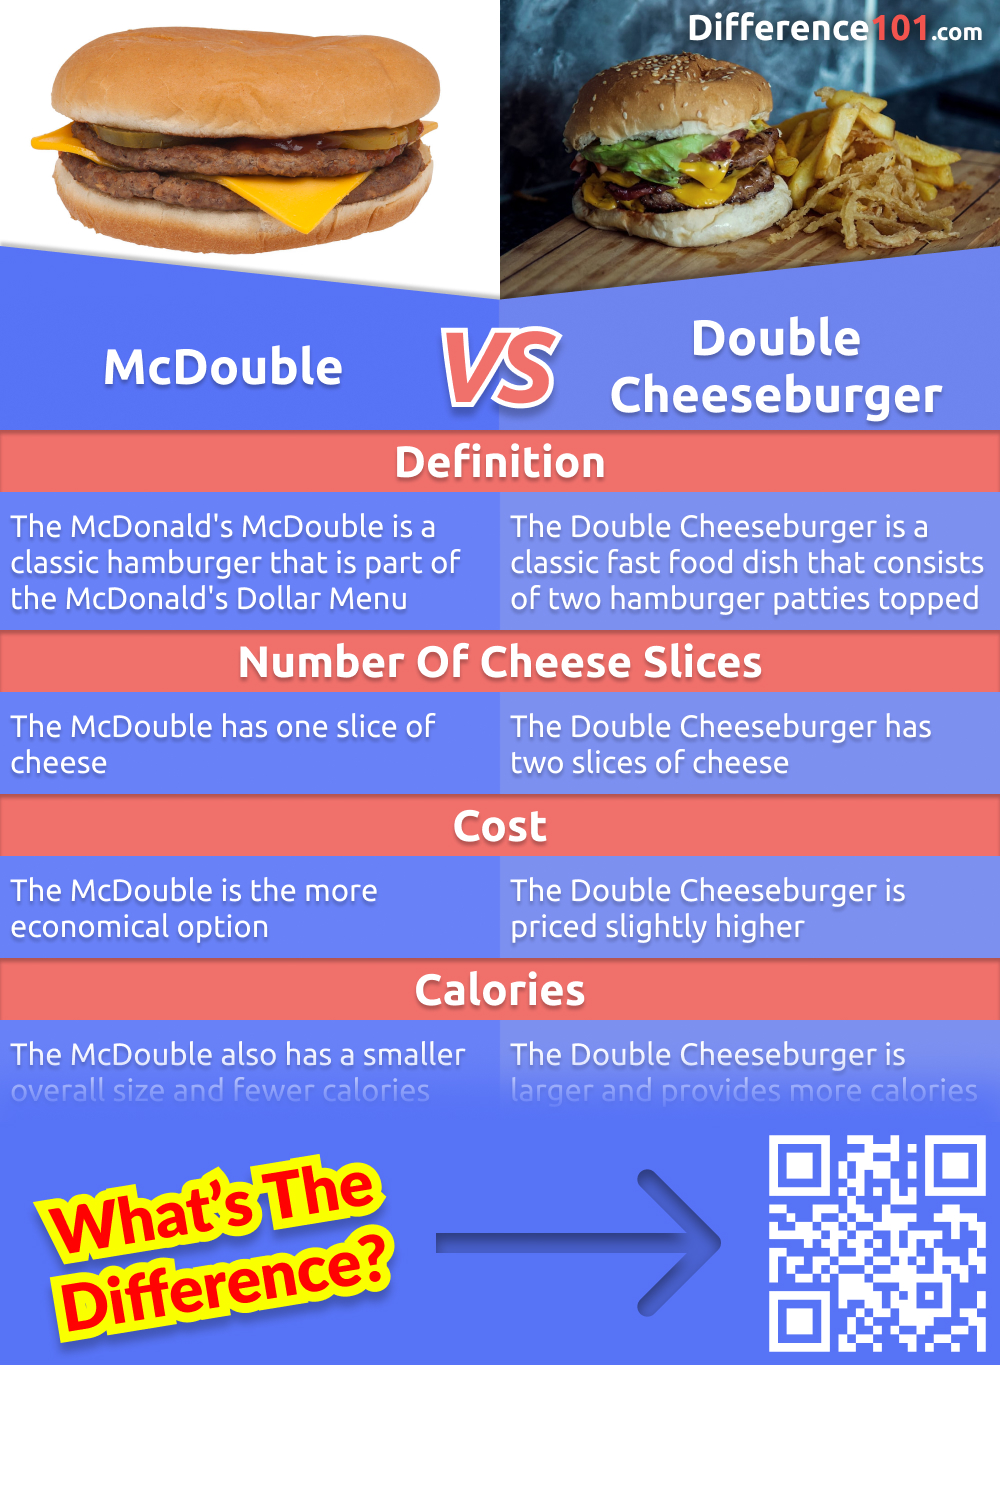 Two of McDonald's most popular burgers are the McDouble and the Double Cheeseburger. But what are the differences between them? We will compare the two burgers in terms of their differences, pros, and cons.